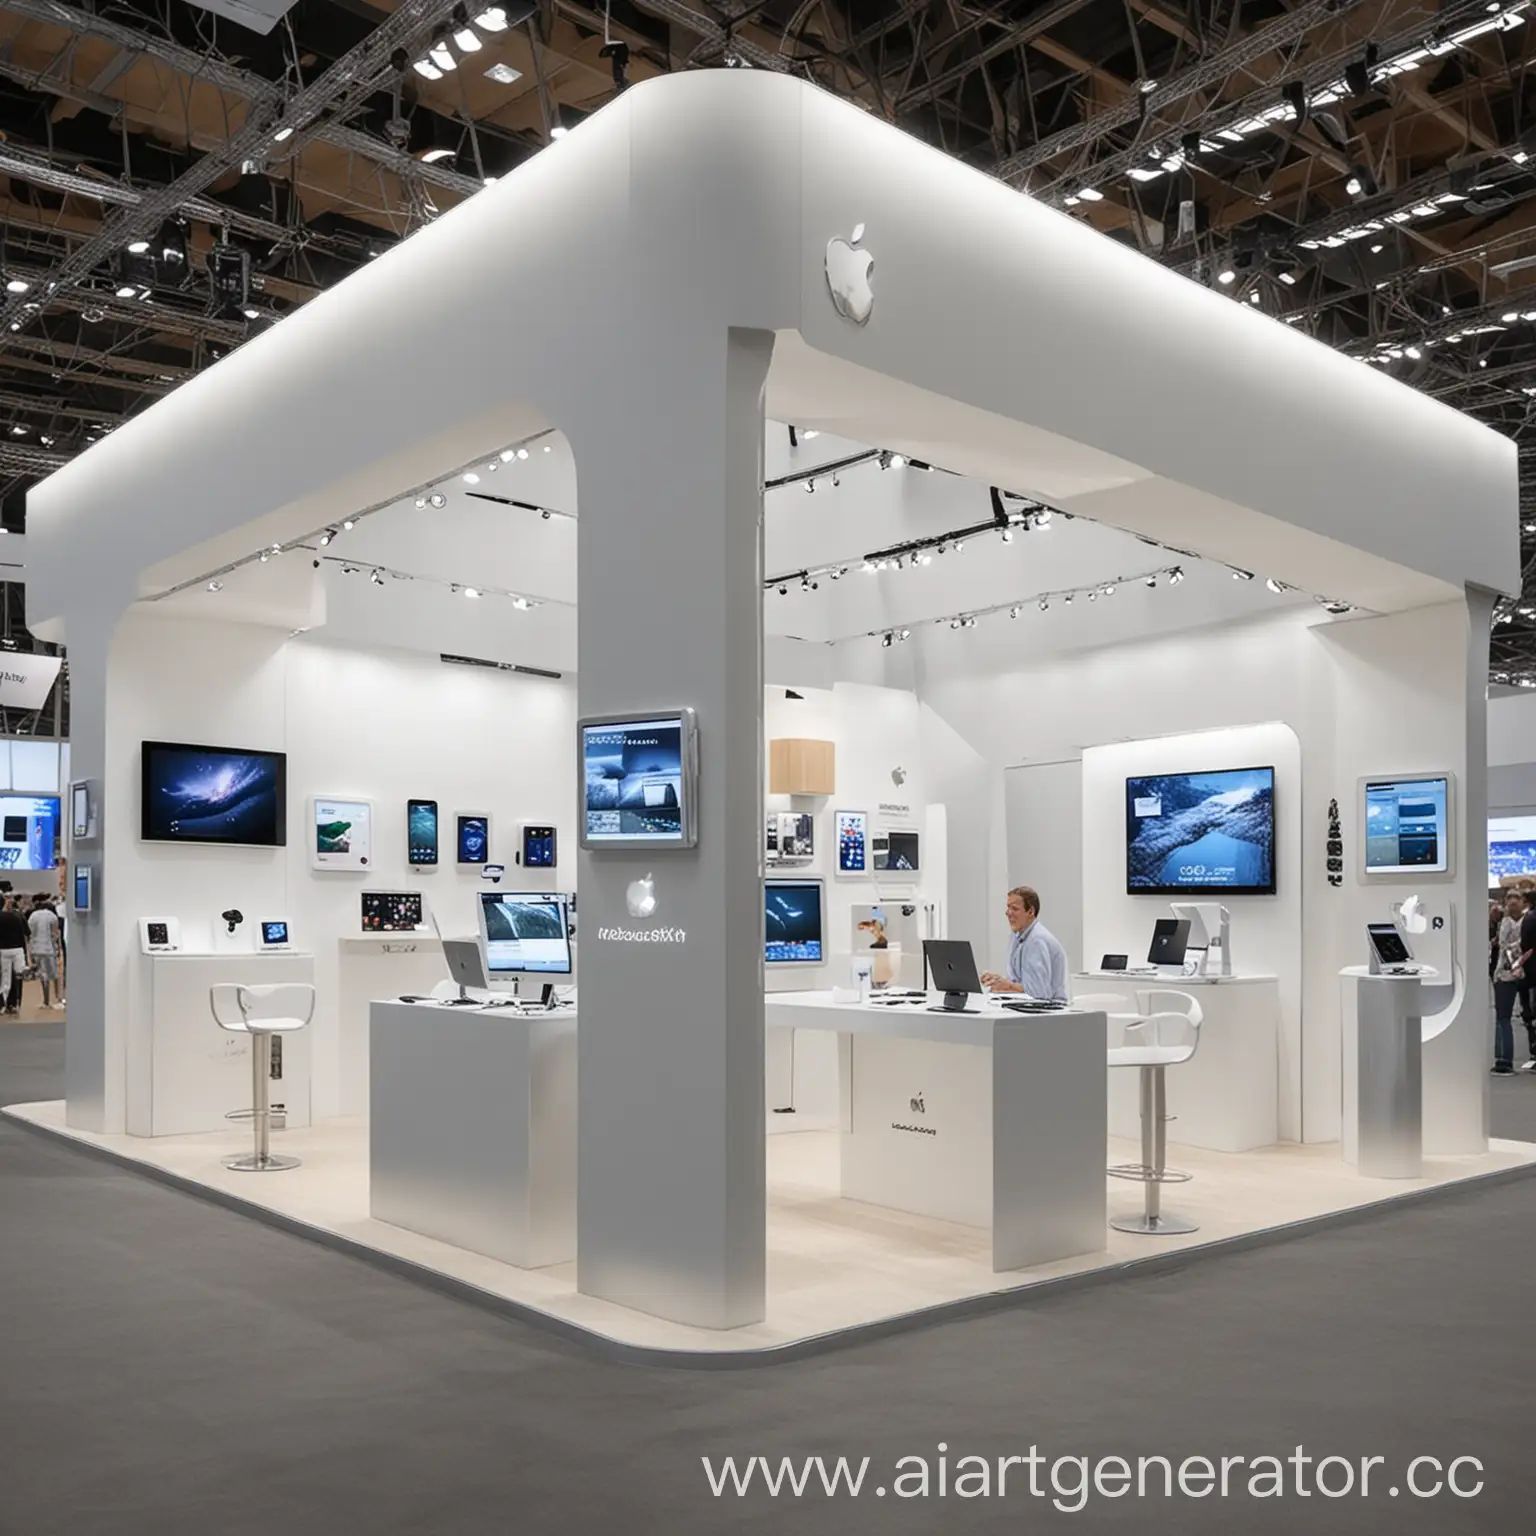 Modern-Minimalist-Apple-Stand-at-CES-Exhibition-Featuring-Latest-Products-and-Demonstrations